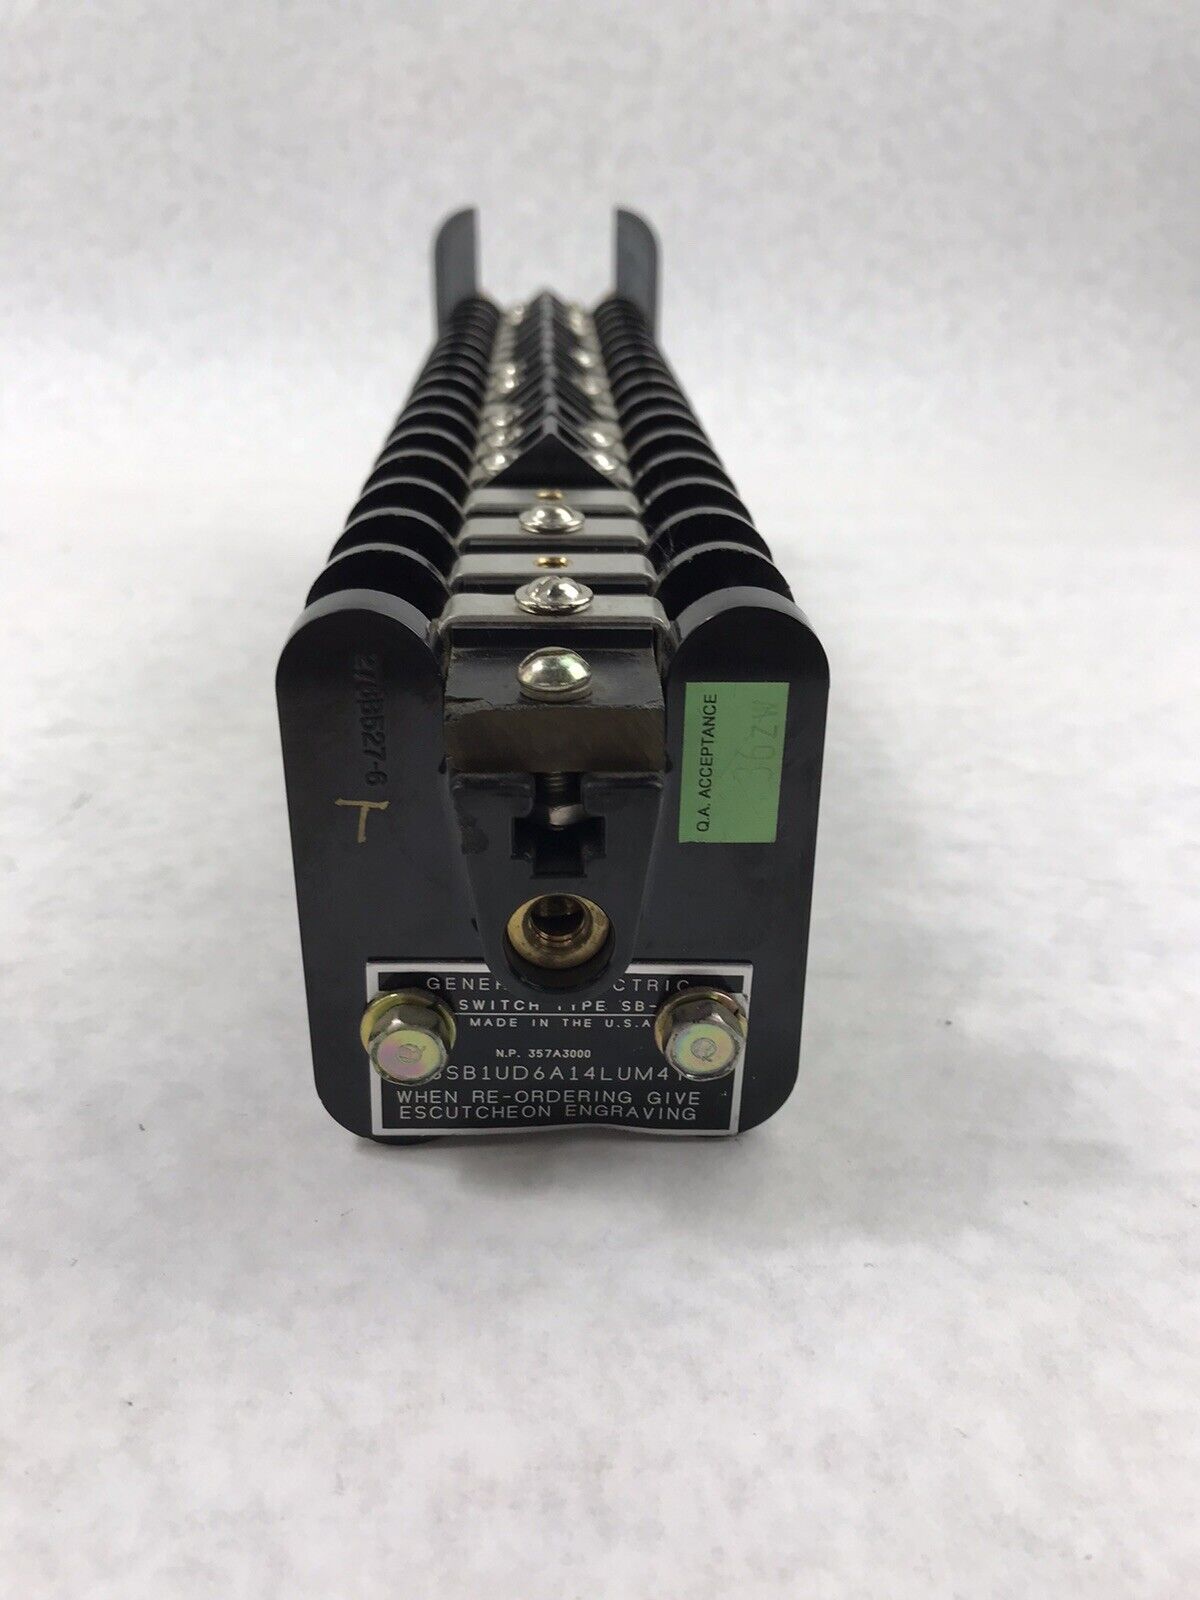 General Electric Rotary Switch Type SB-1 357A3000 16SB1MB3A46LUM4Y